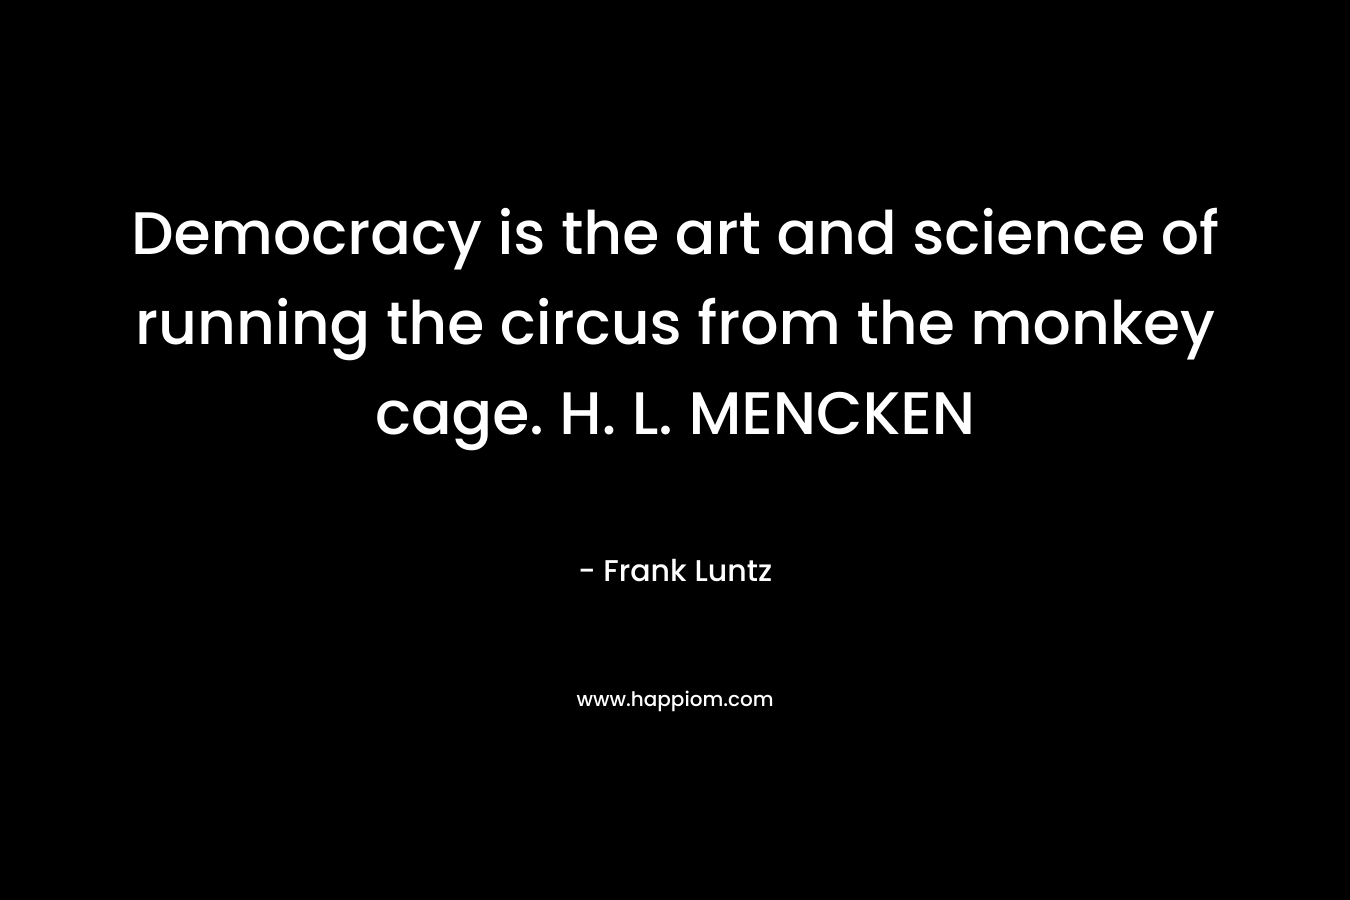 Democracy is the art and science of running the circus from the monkey cage. H. L. MENCKEN – Frank Luntz